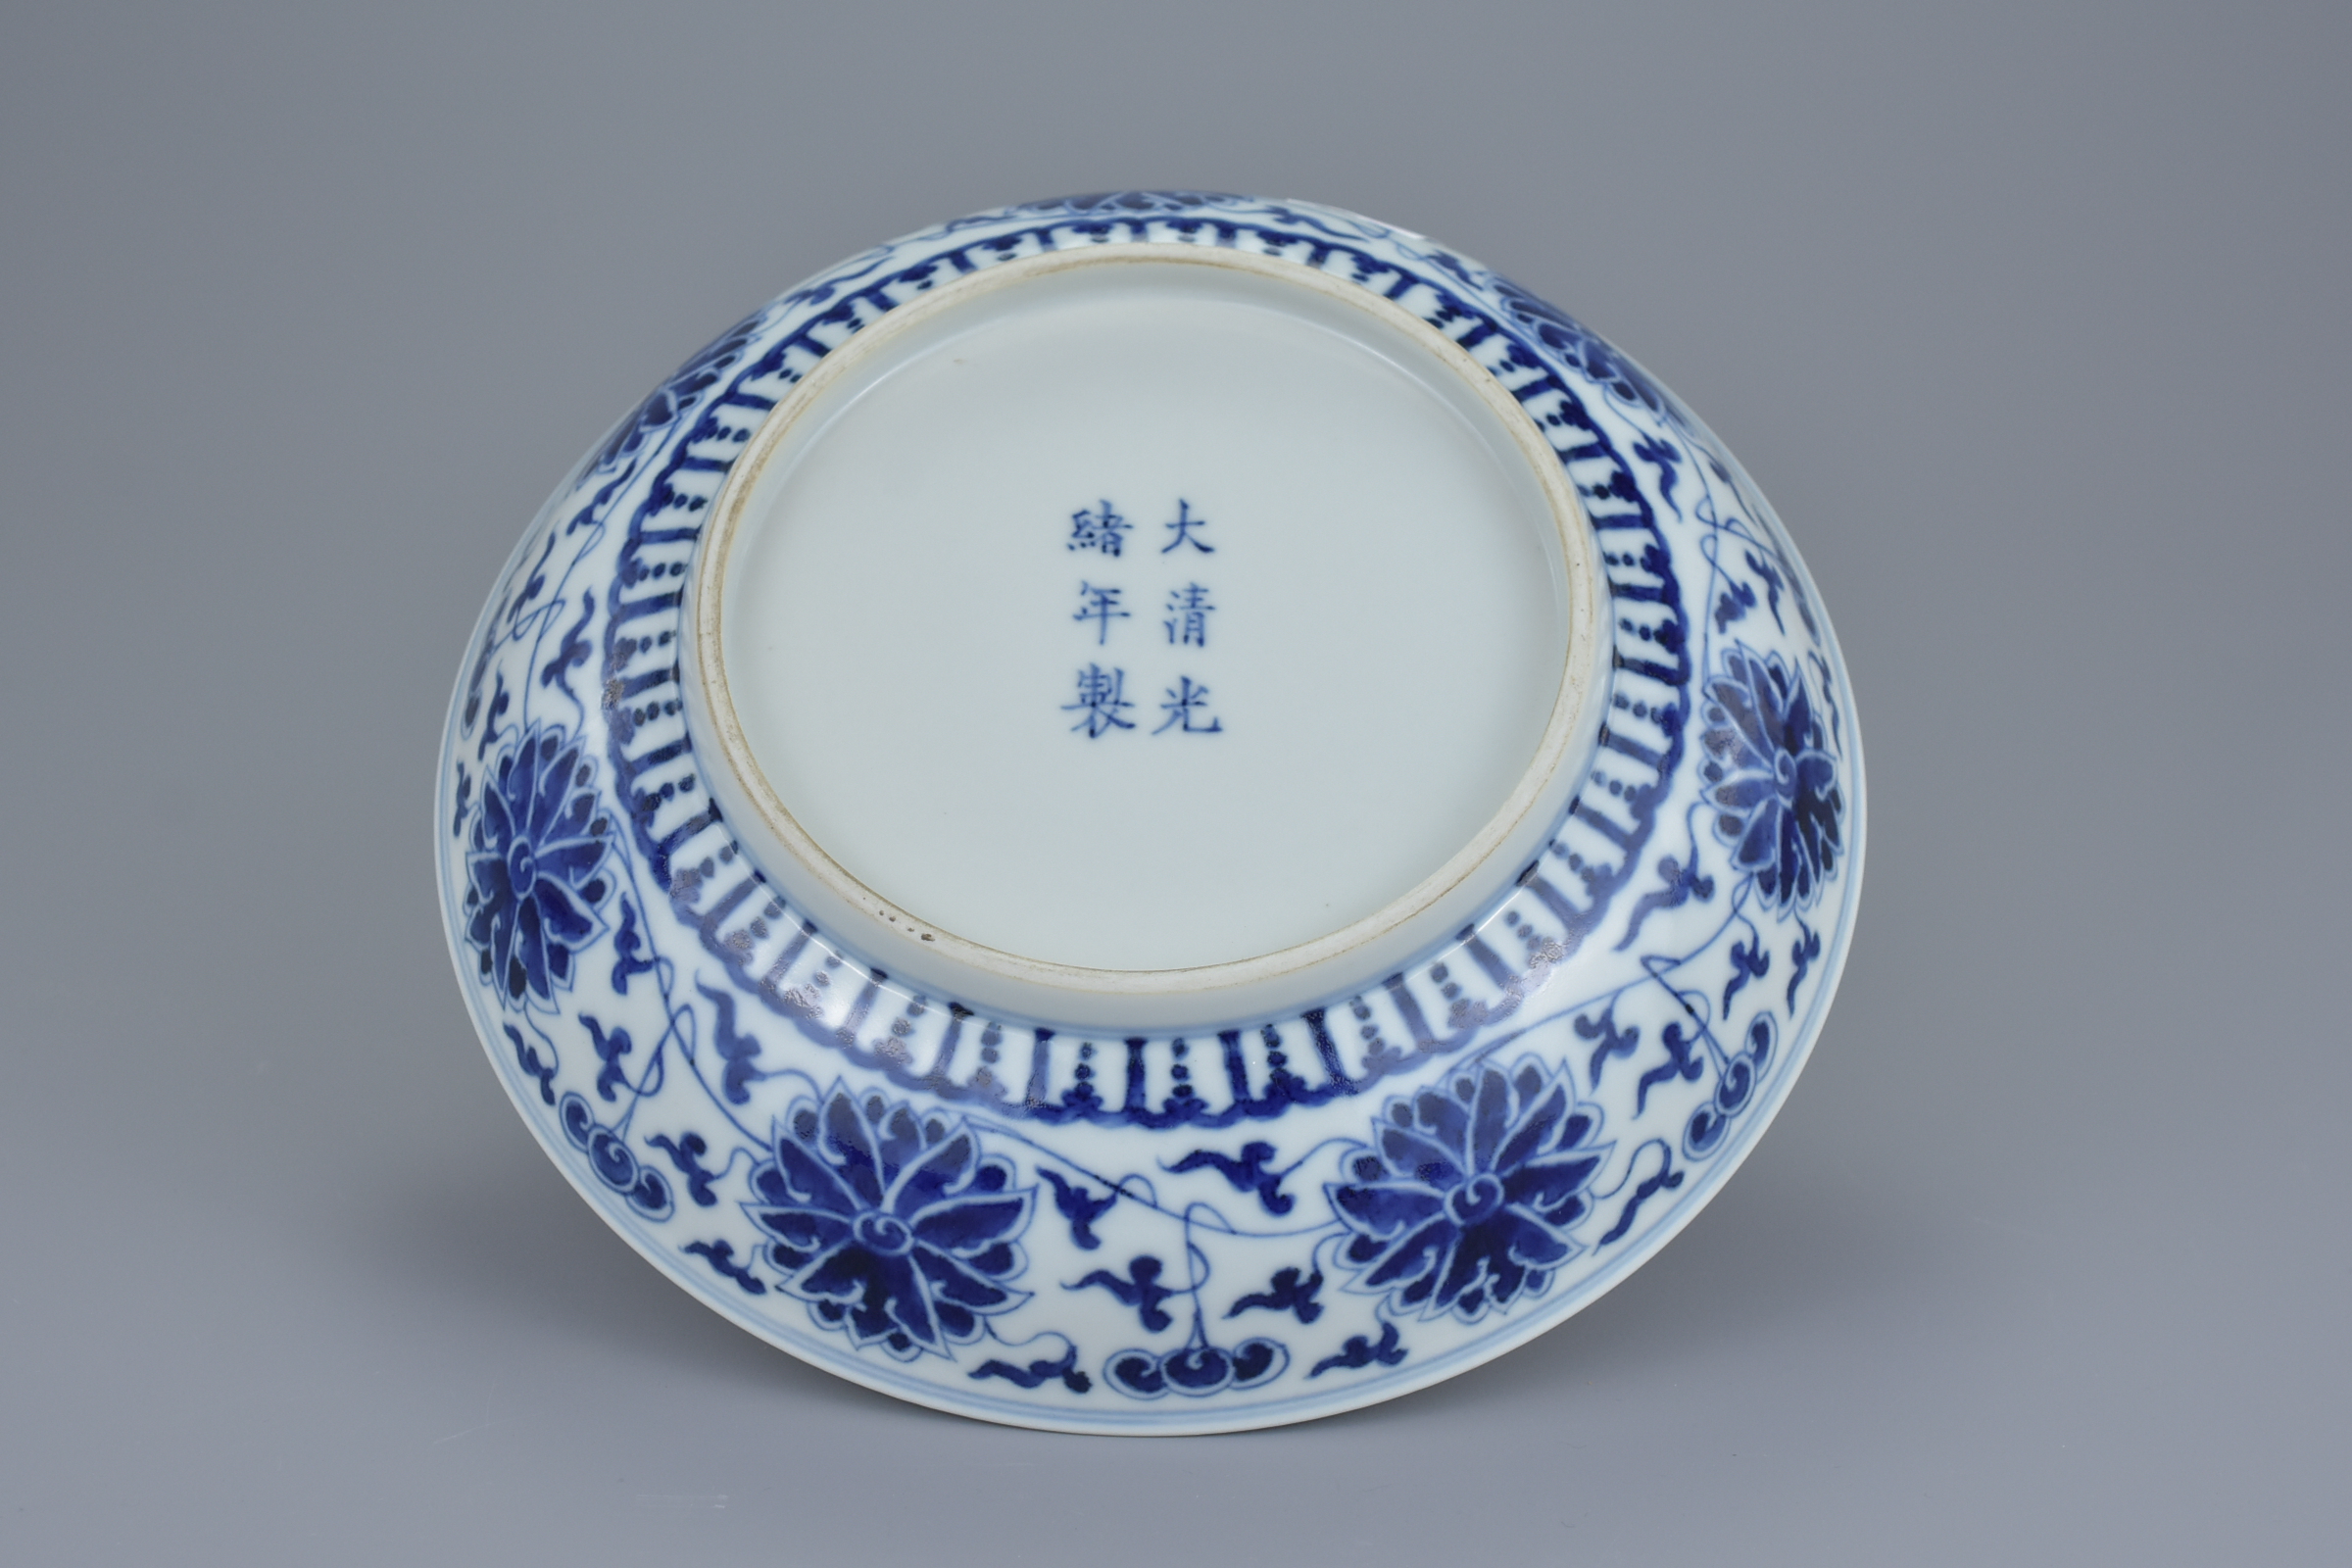 A Chinese late 19th century blue and white porcelain dish with floral lotus, chrysanthemum and peony - Image 3 of 6